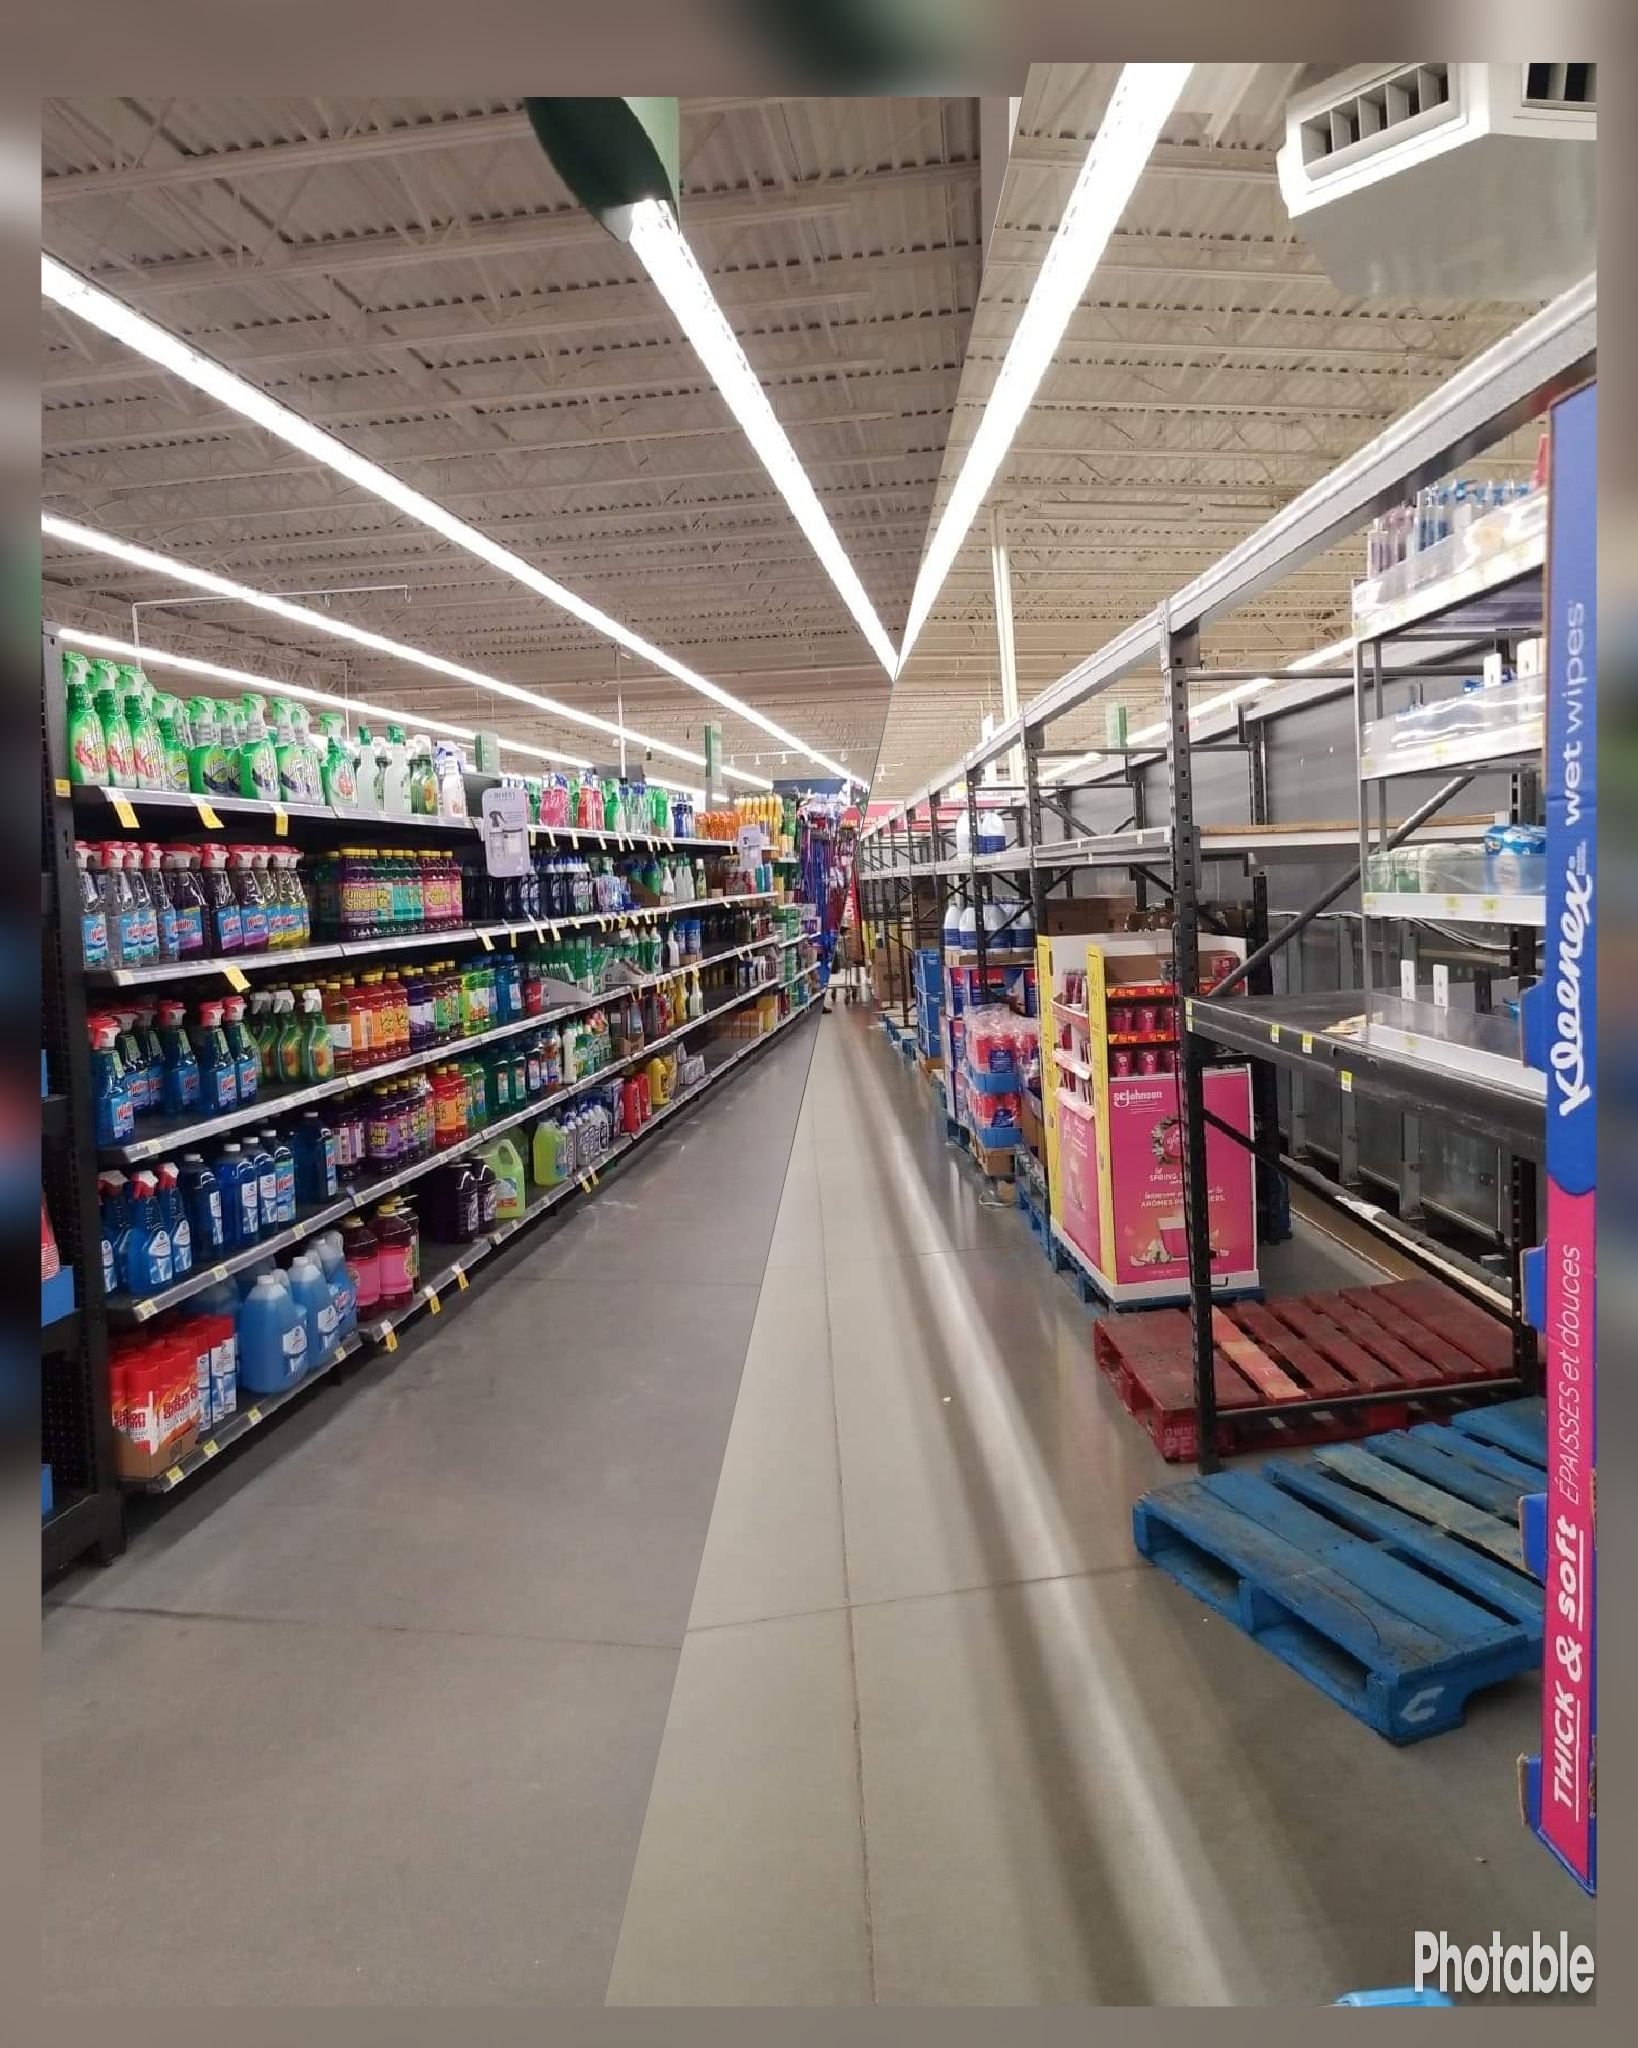 The cleaning supplies vs toilet paper aisles